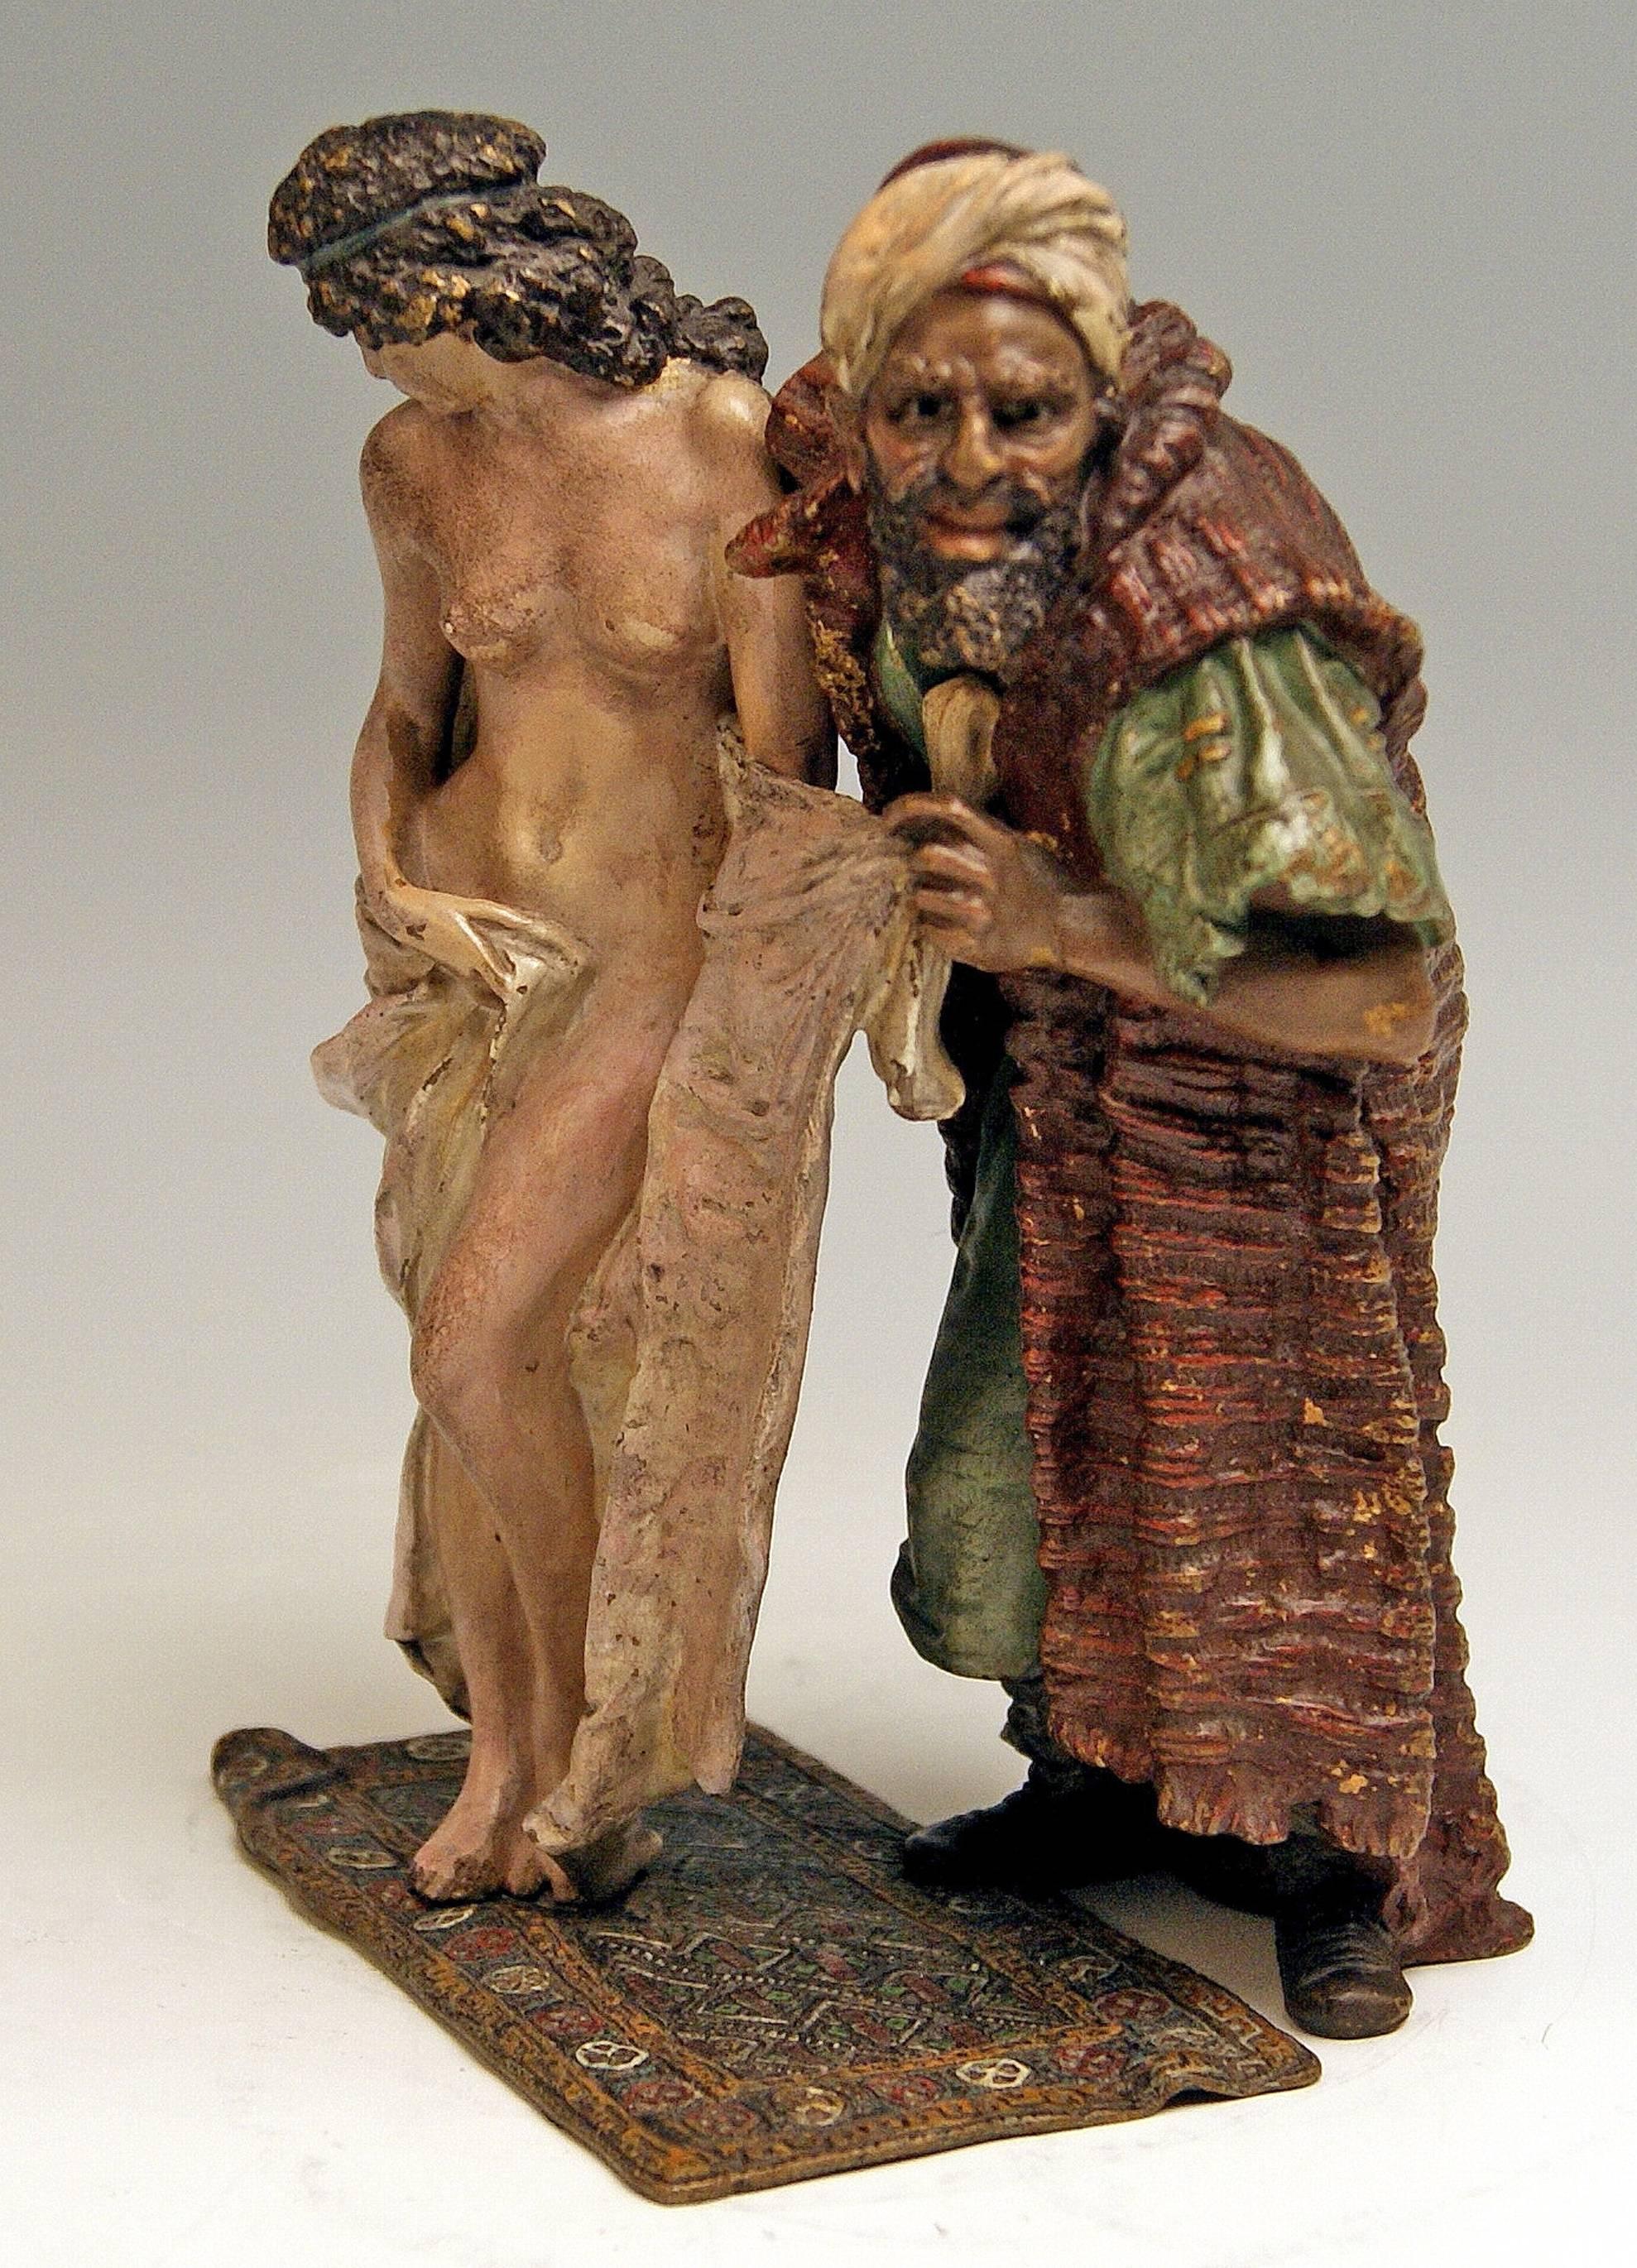 Stunning bronze figurine group: Arab man with female nude the slave trader
 
This excellent Vienna bronze figurine group is of finest manufacturing quality:
An Arab bearded old man wearing turban and long mantel stands behind a female nude,